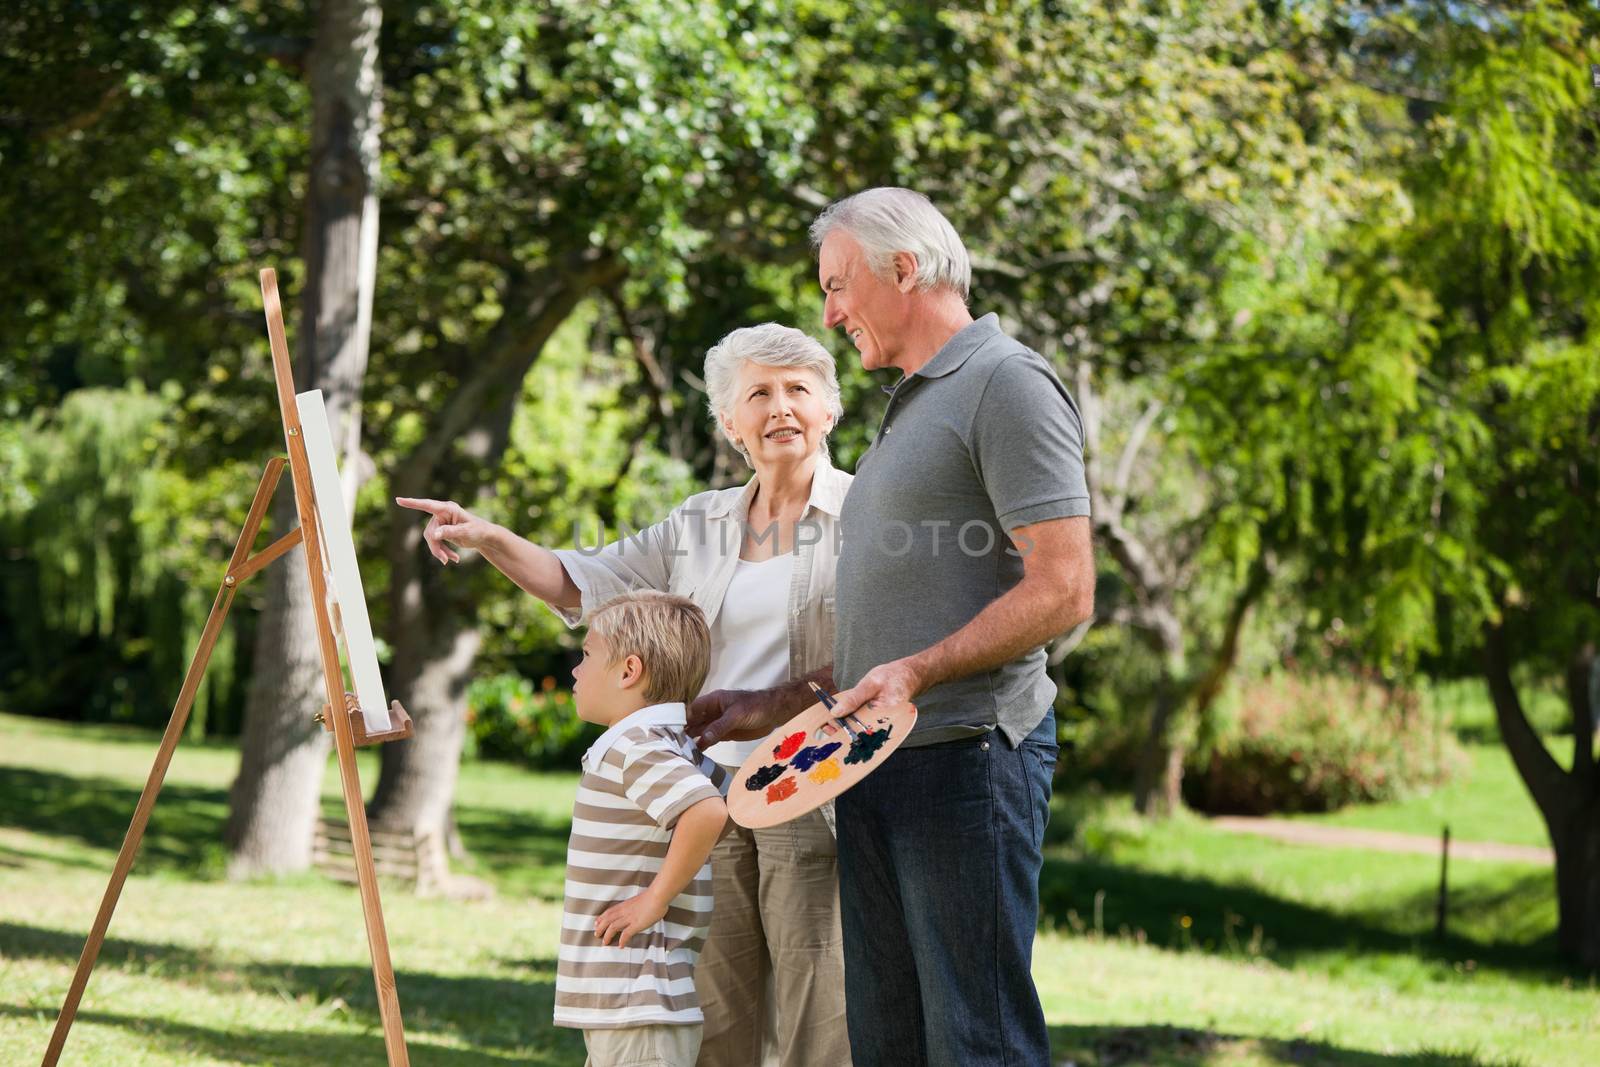 Family painting in the garden by Wavebreakmedia